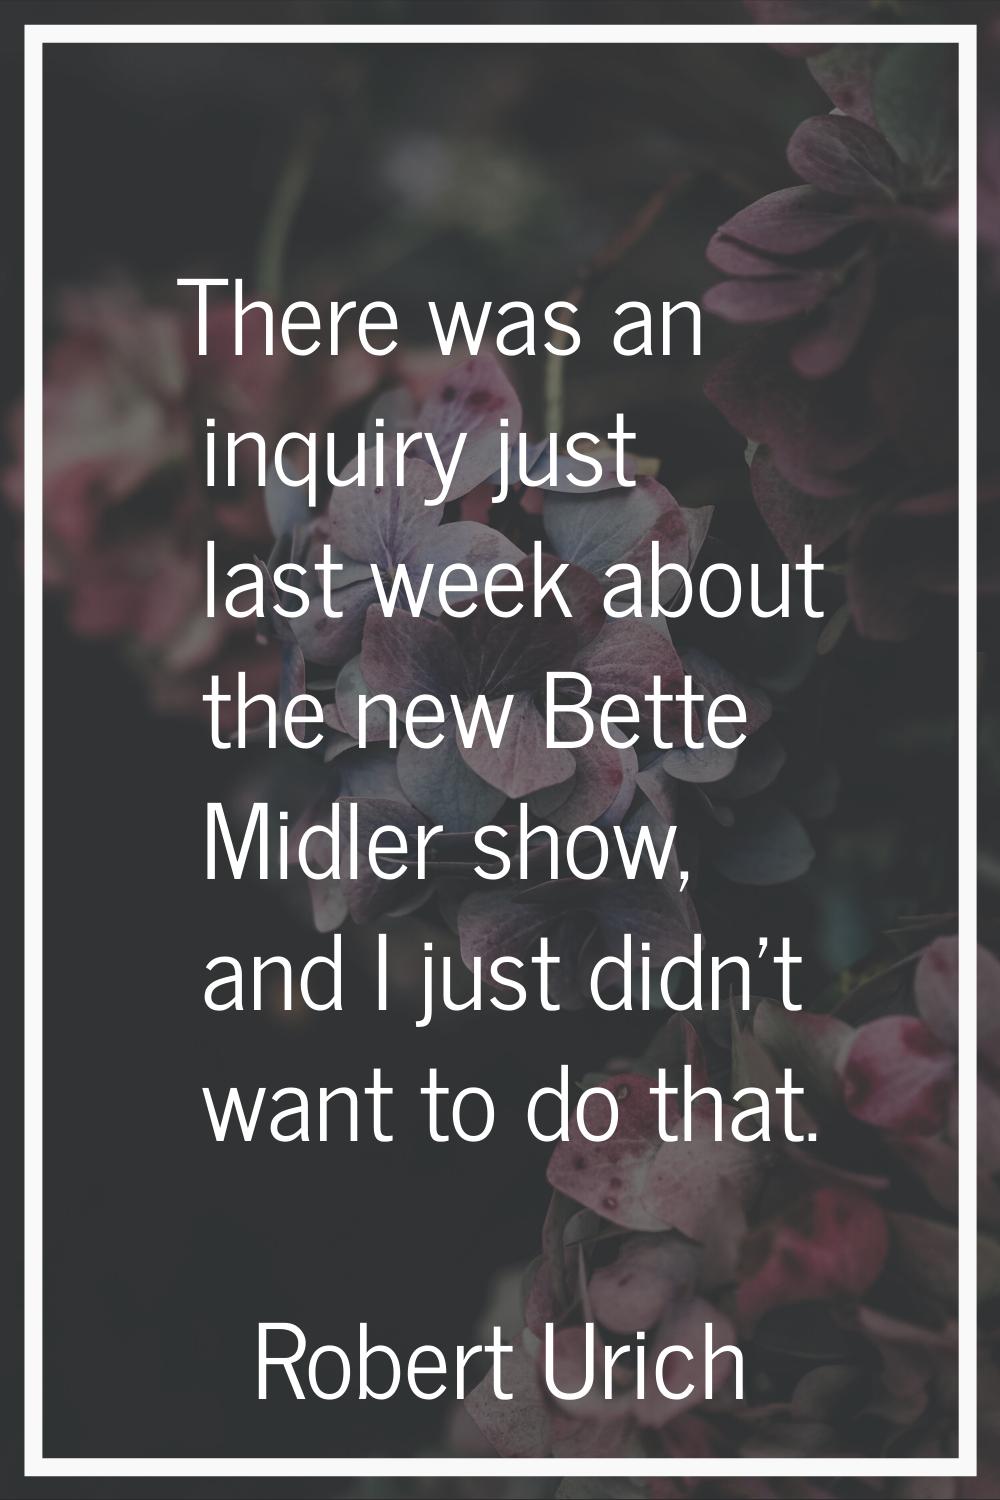 There was an inquiry just last week about the new Bette Midler show, and I just didn't want to do t